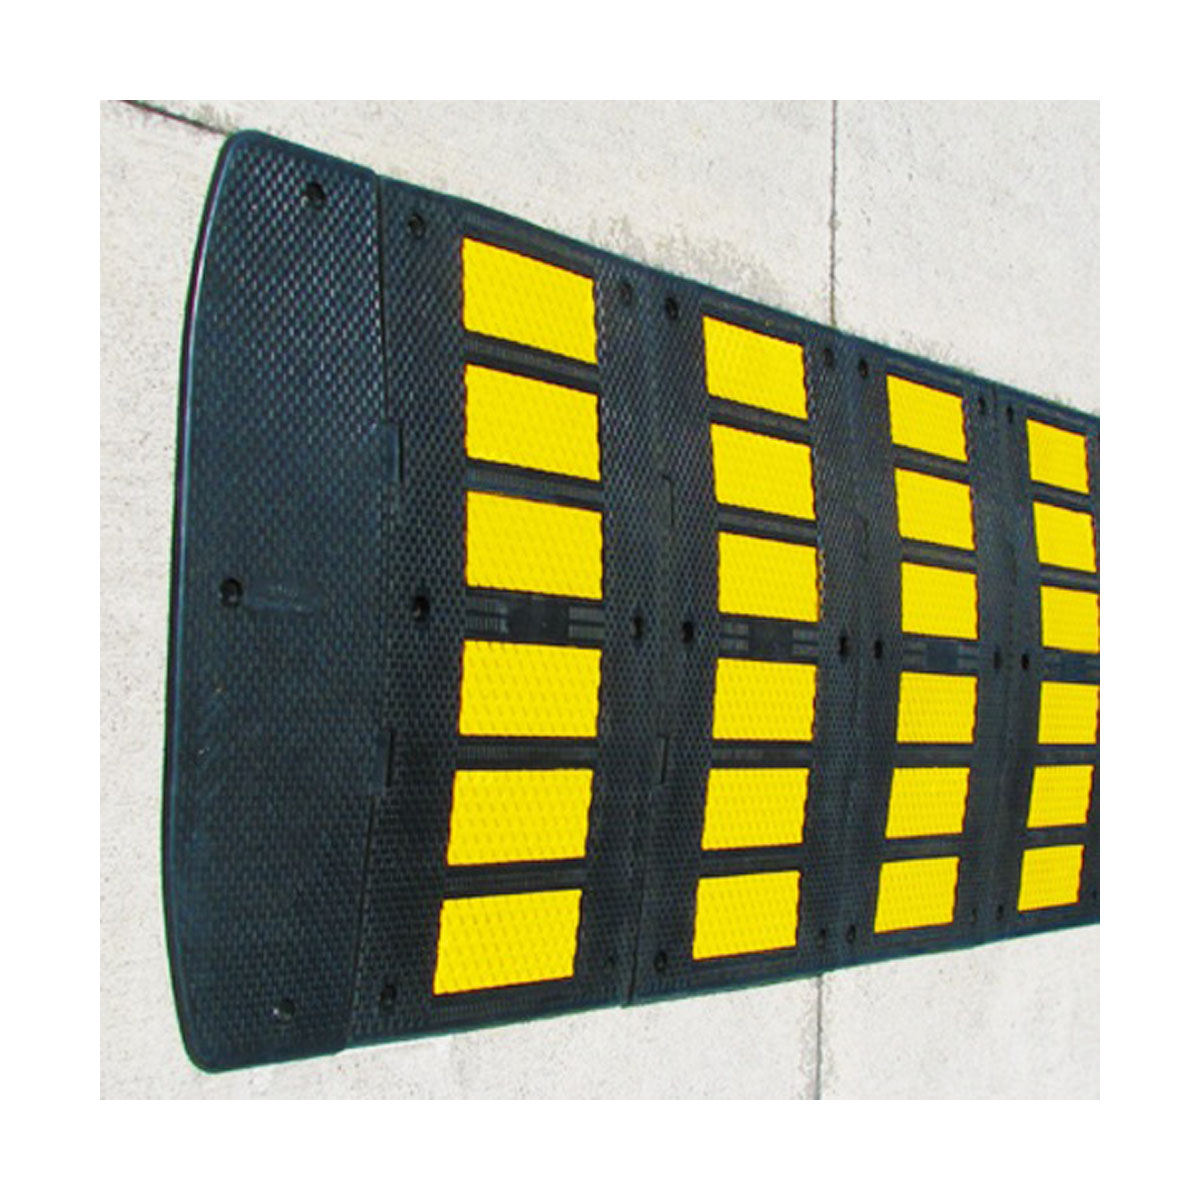 Buy Speed Cushion 50mm Traffic Calming available at Astrolift NZ